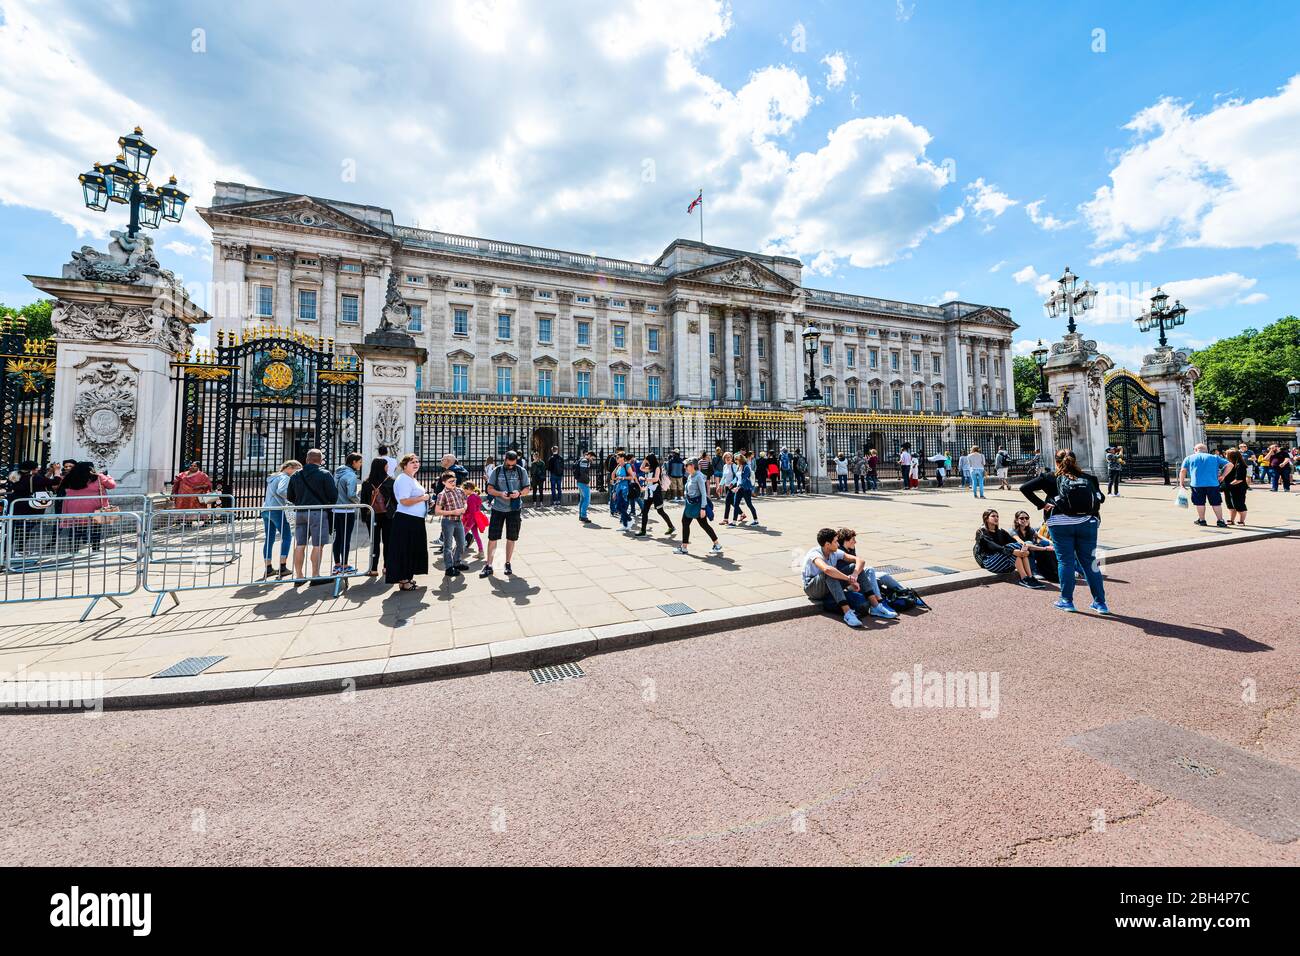 London, UK - June 21, 2018: Gold gate fence entrance at Buckingham Palace with many people tourists walking on street road sightseeing in United Kingd Stock Photo